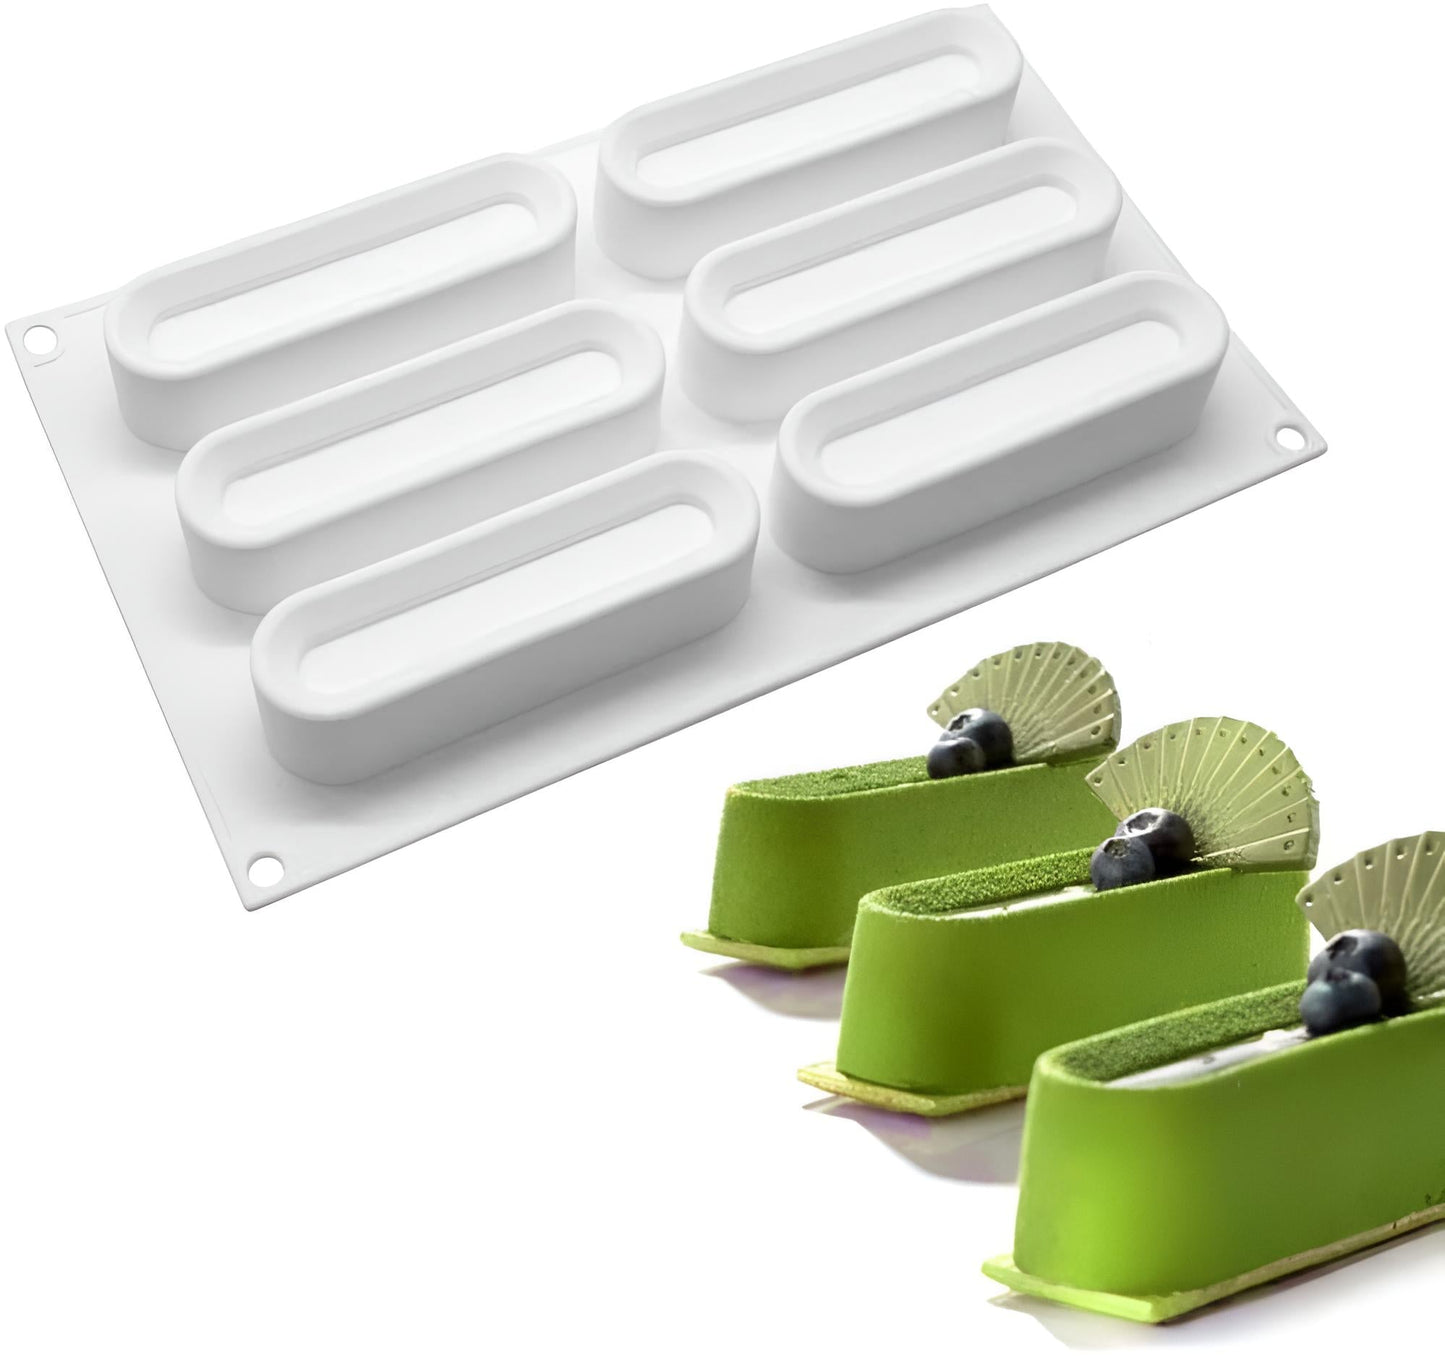 Eclairs Silicone Baking Mold 6 Cavity